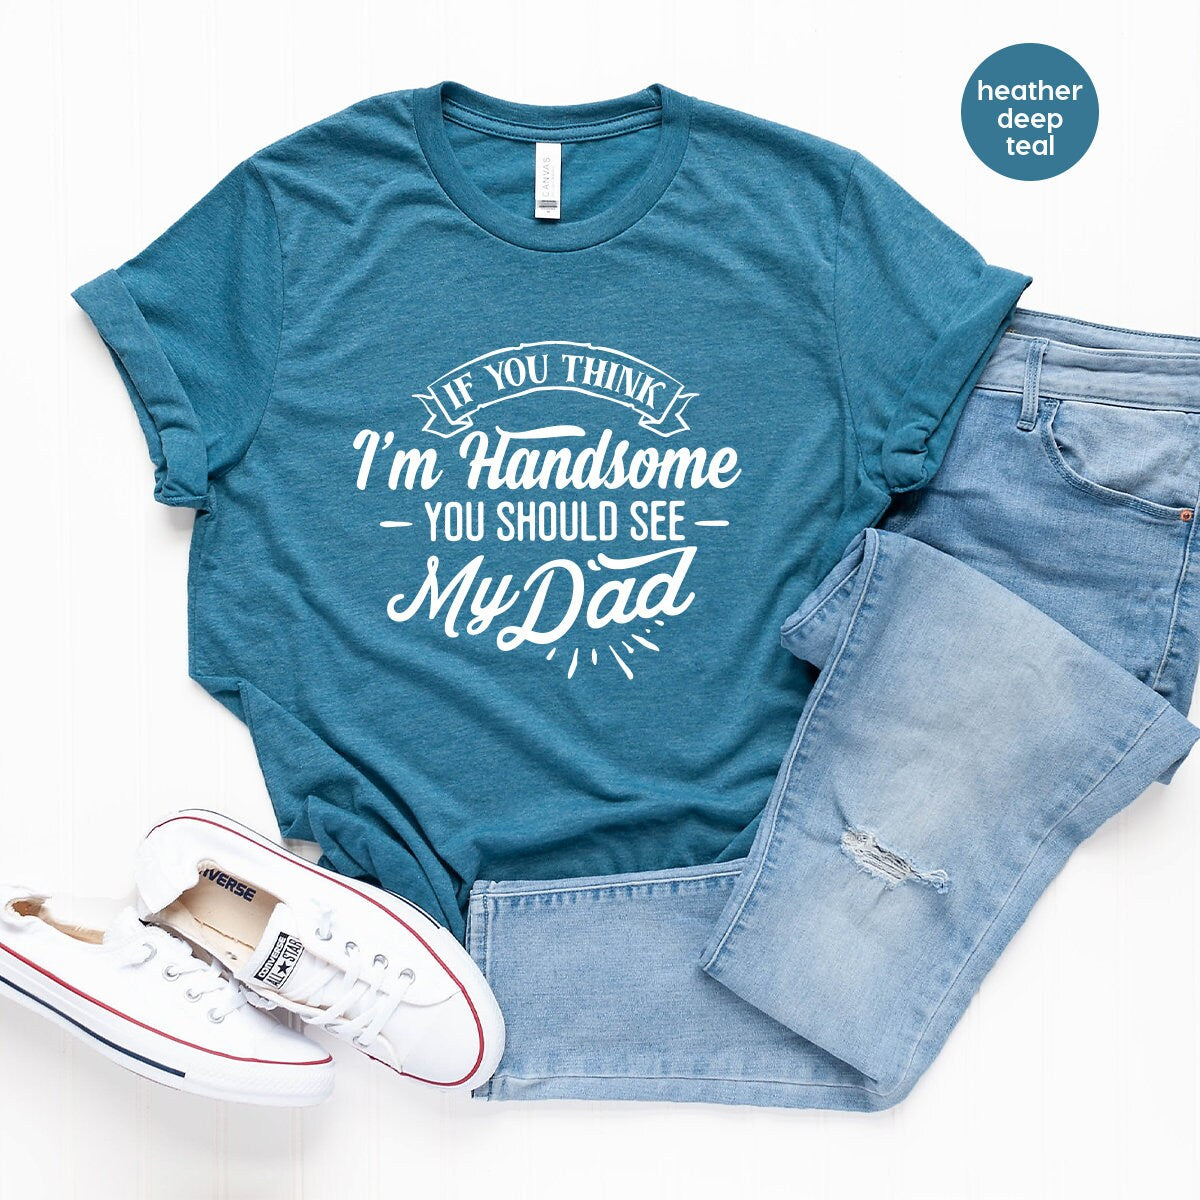 Cool Dad Shirt, Handsome Daddy T Shirt, Best Dad Shirt, Gift For New Dad, Funny Dad Shirt, Fatherhood Shirt, Dad Gift, Papa Shirt, Dad Jokes - Fastdeliverytees.com